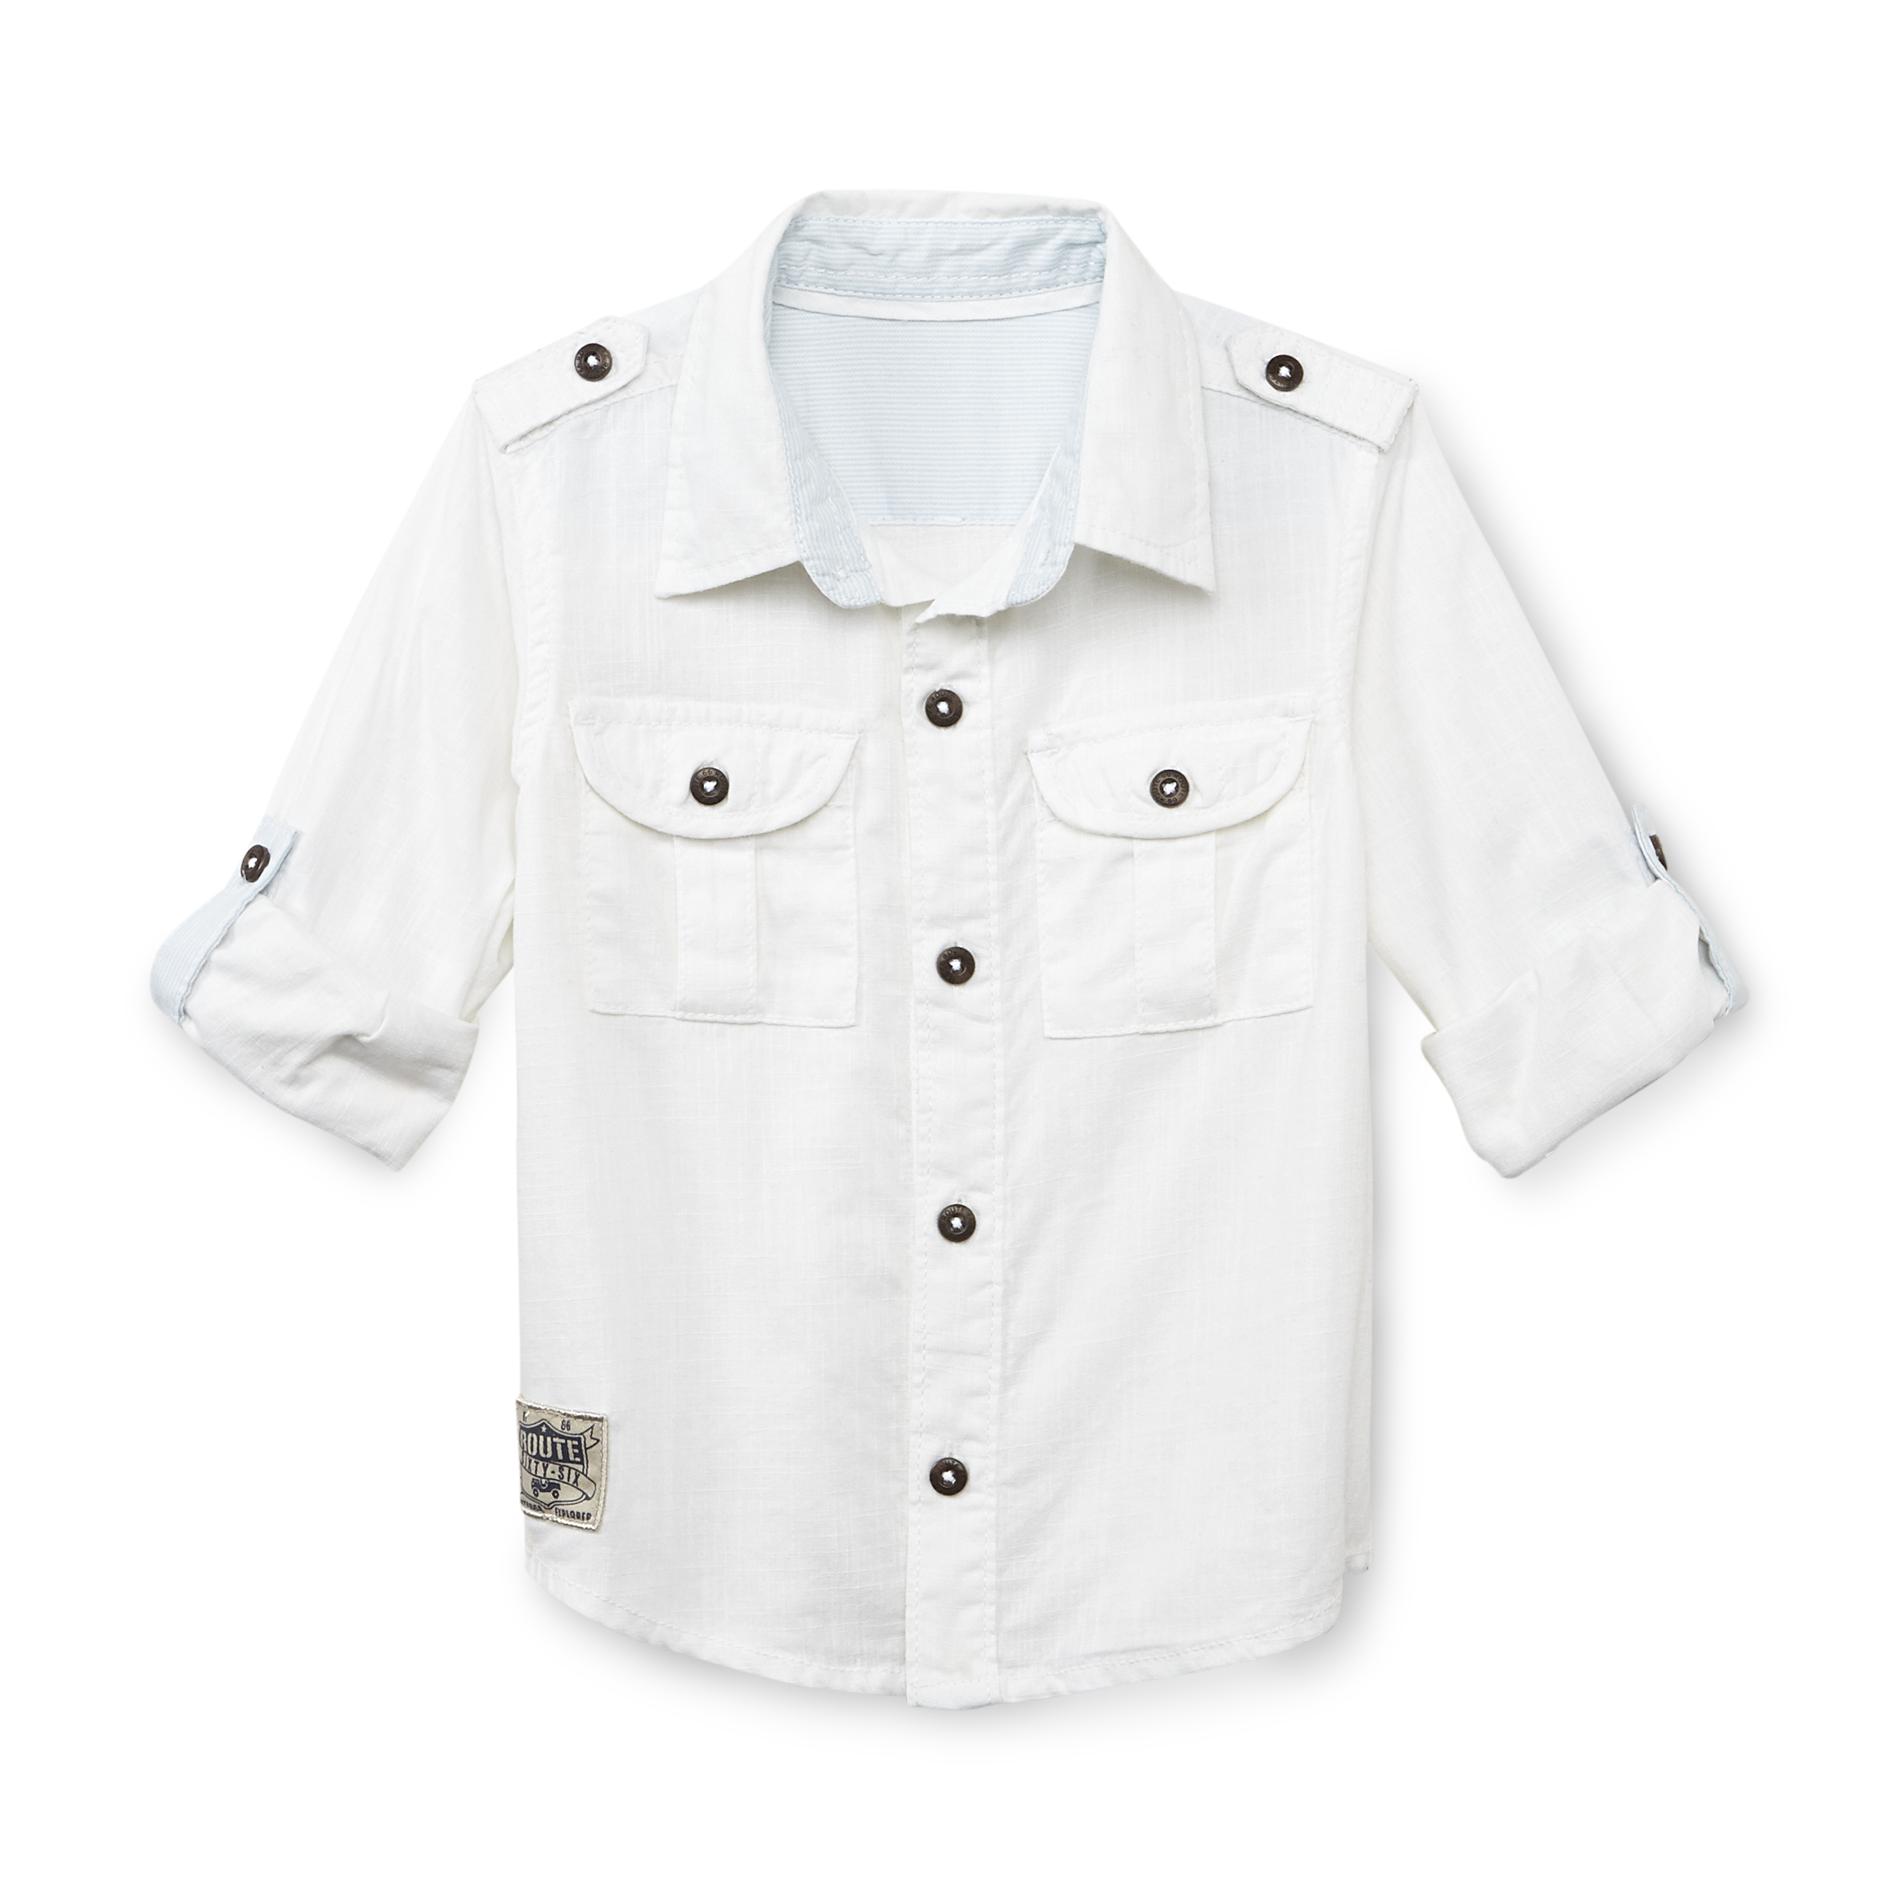 Route 66 Infant & Toddler Boy's Chambray Shirt